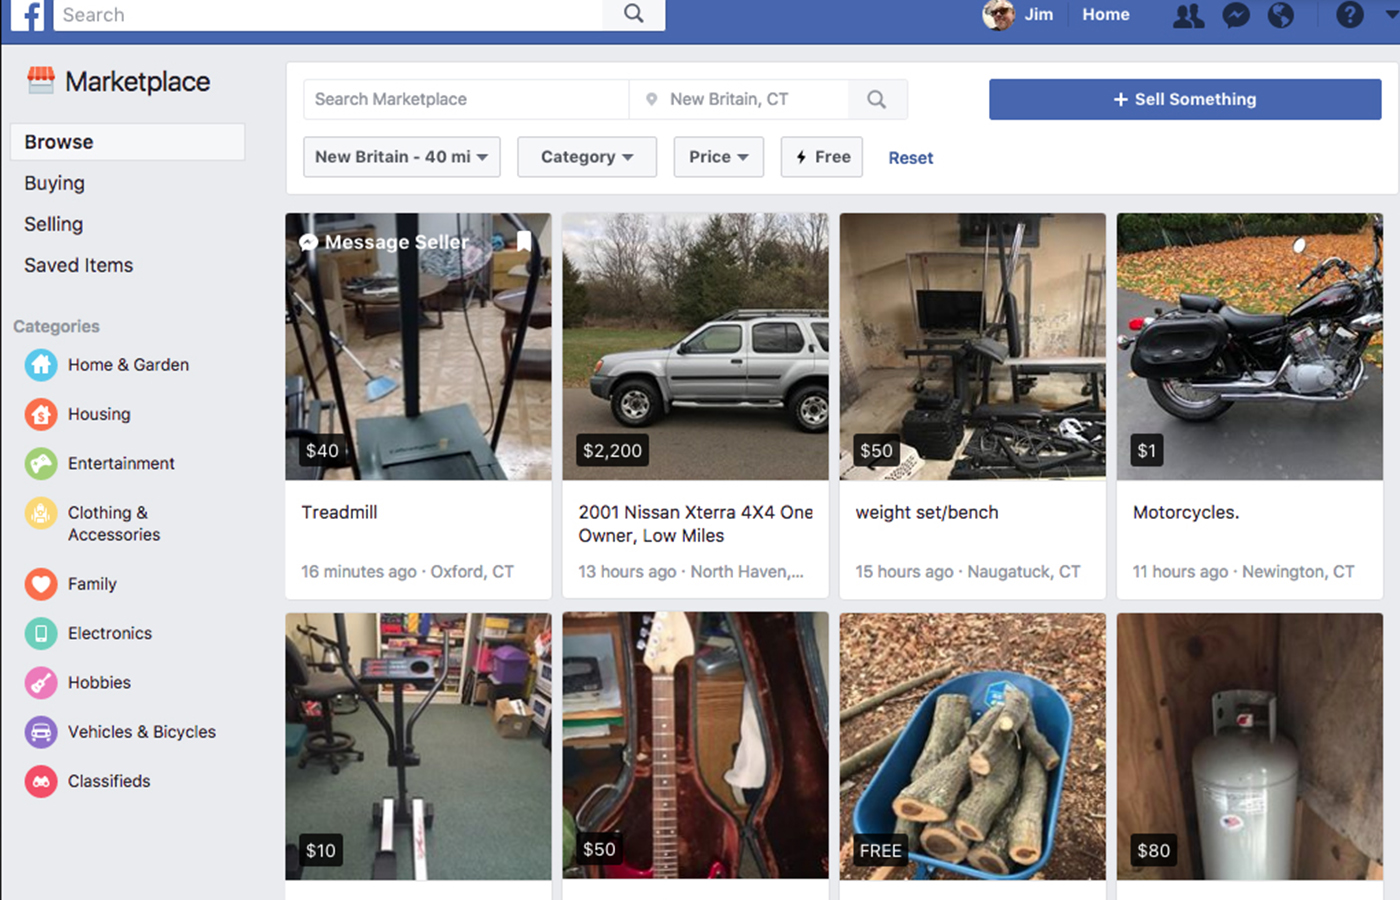 How to Sell on Facebook Marketplace (Tips, Costs, Profits, and Safety)